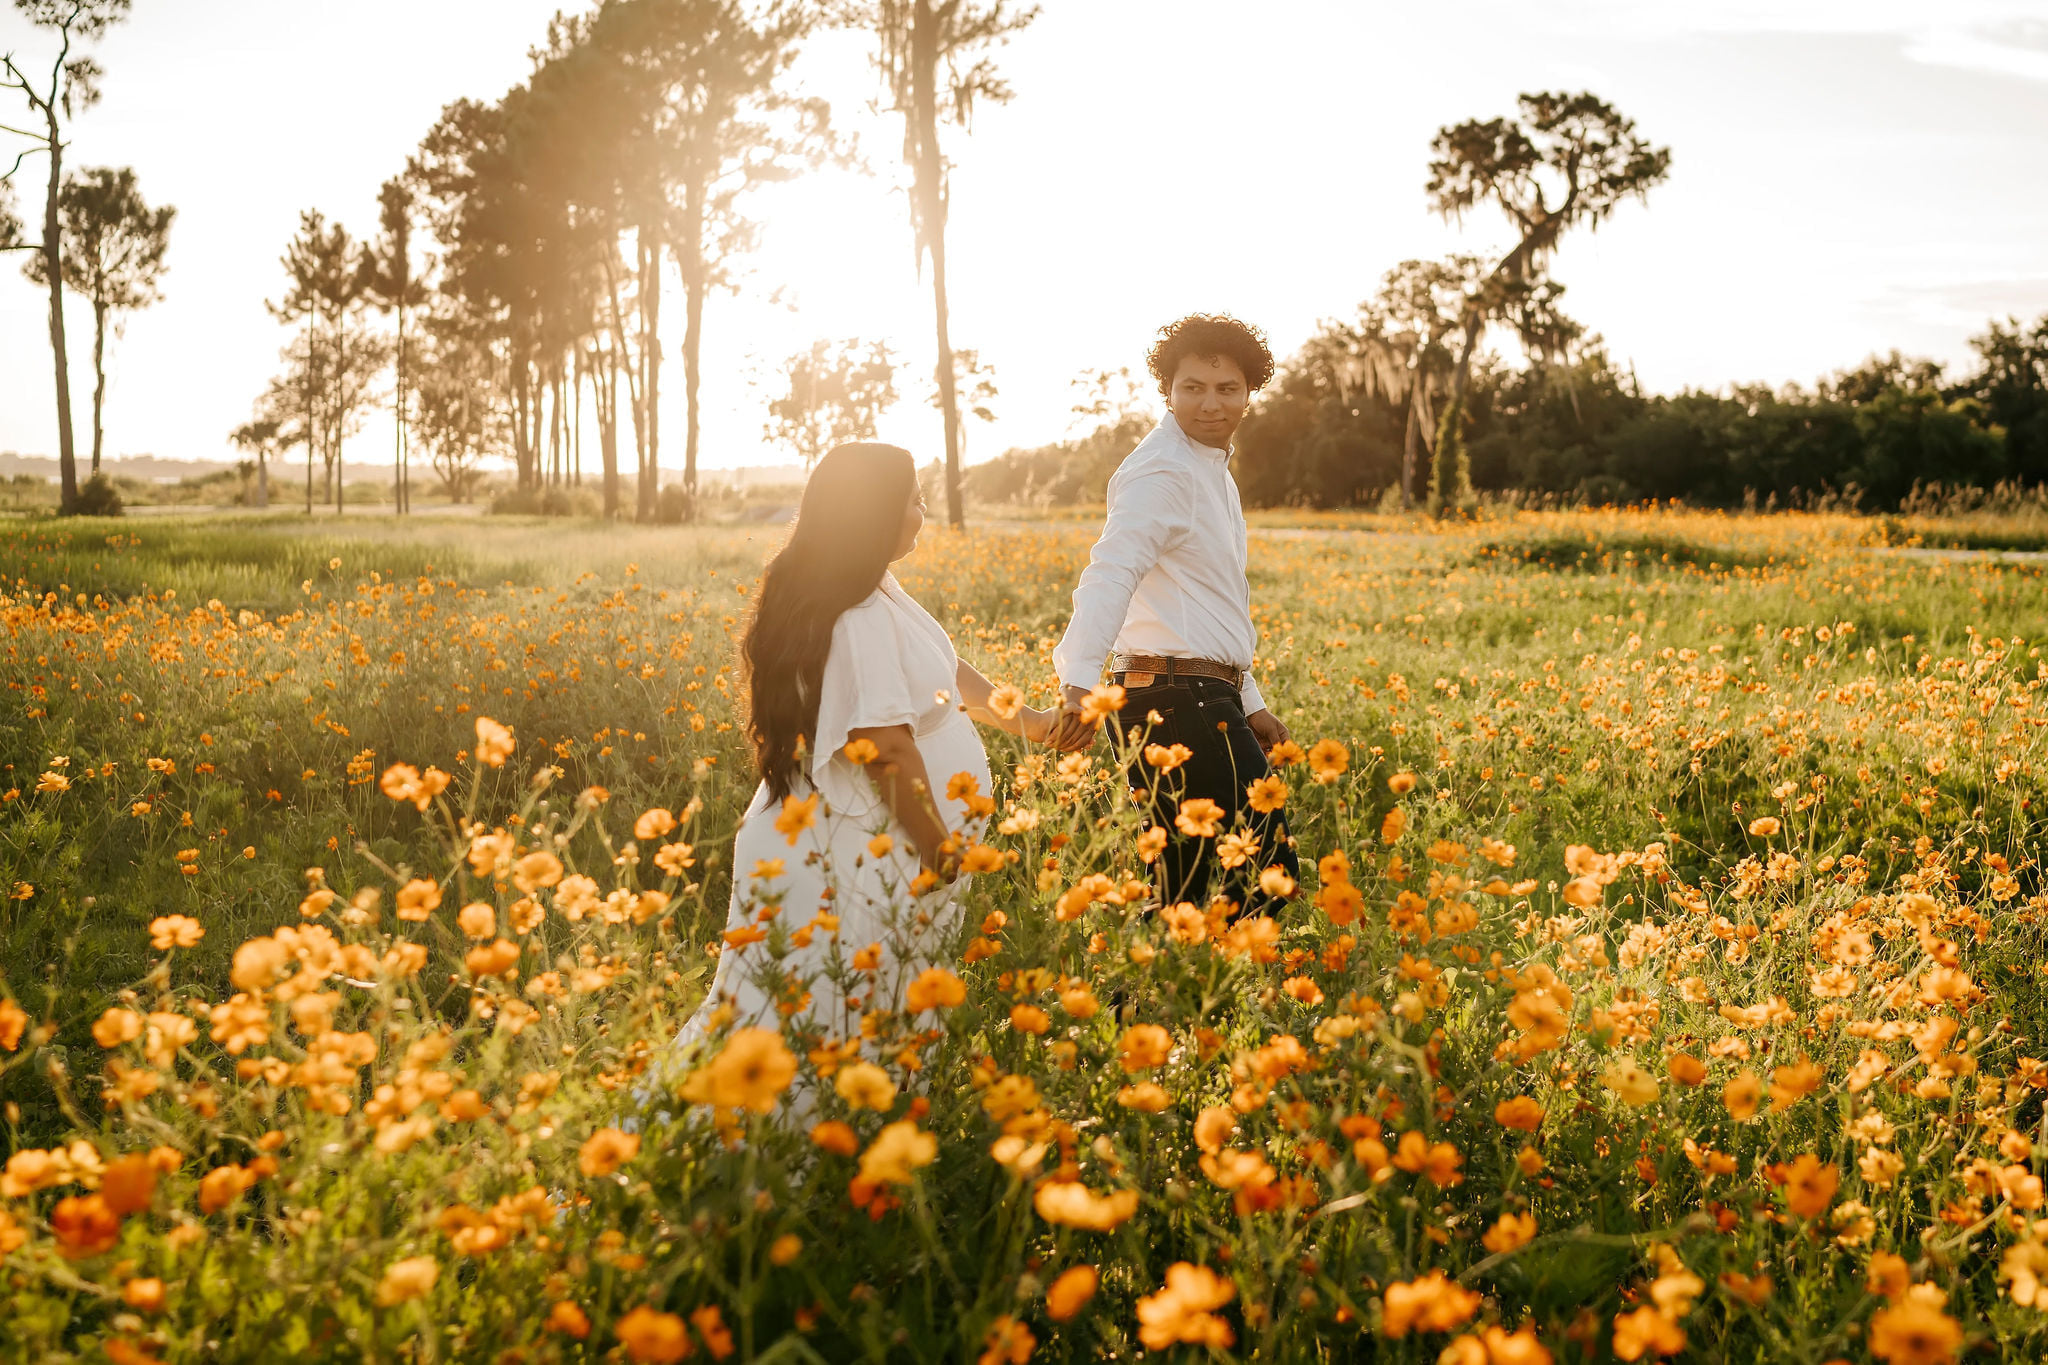 A couple experiencing a romantic sunset stroll through a breathtaking field of poppies, envisioning their dream Florida Wedding Venue.